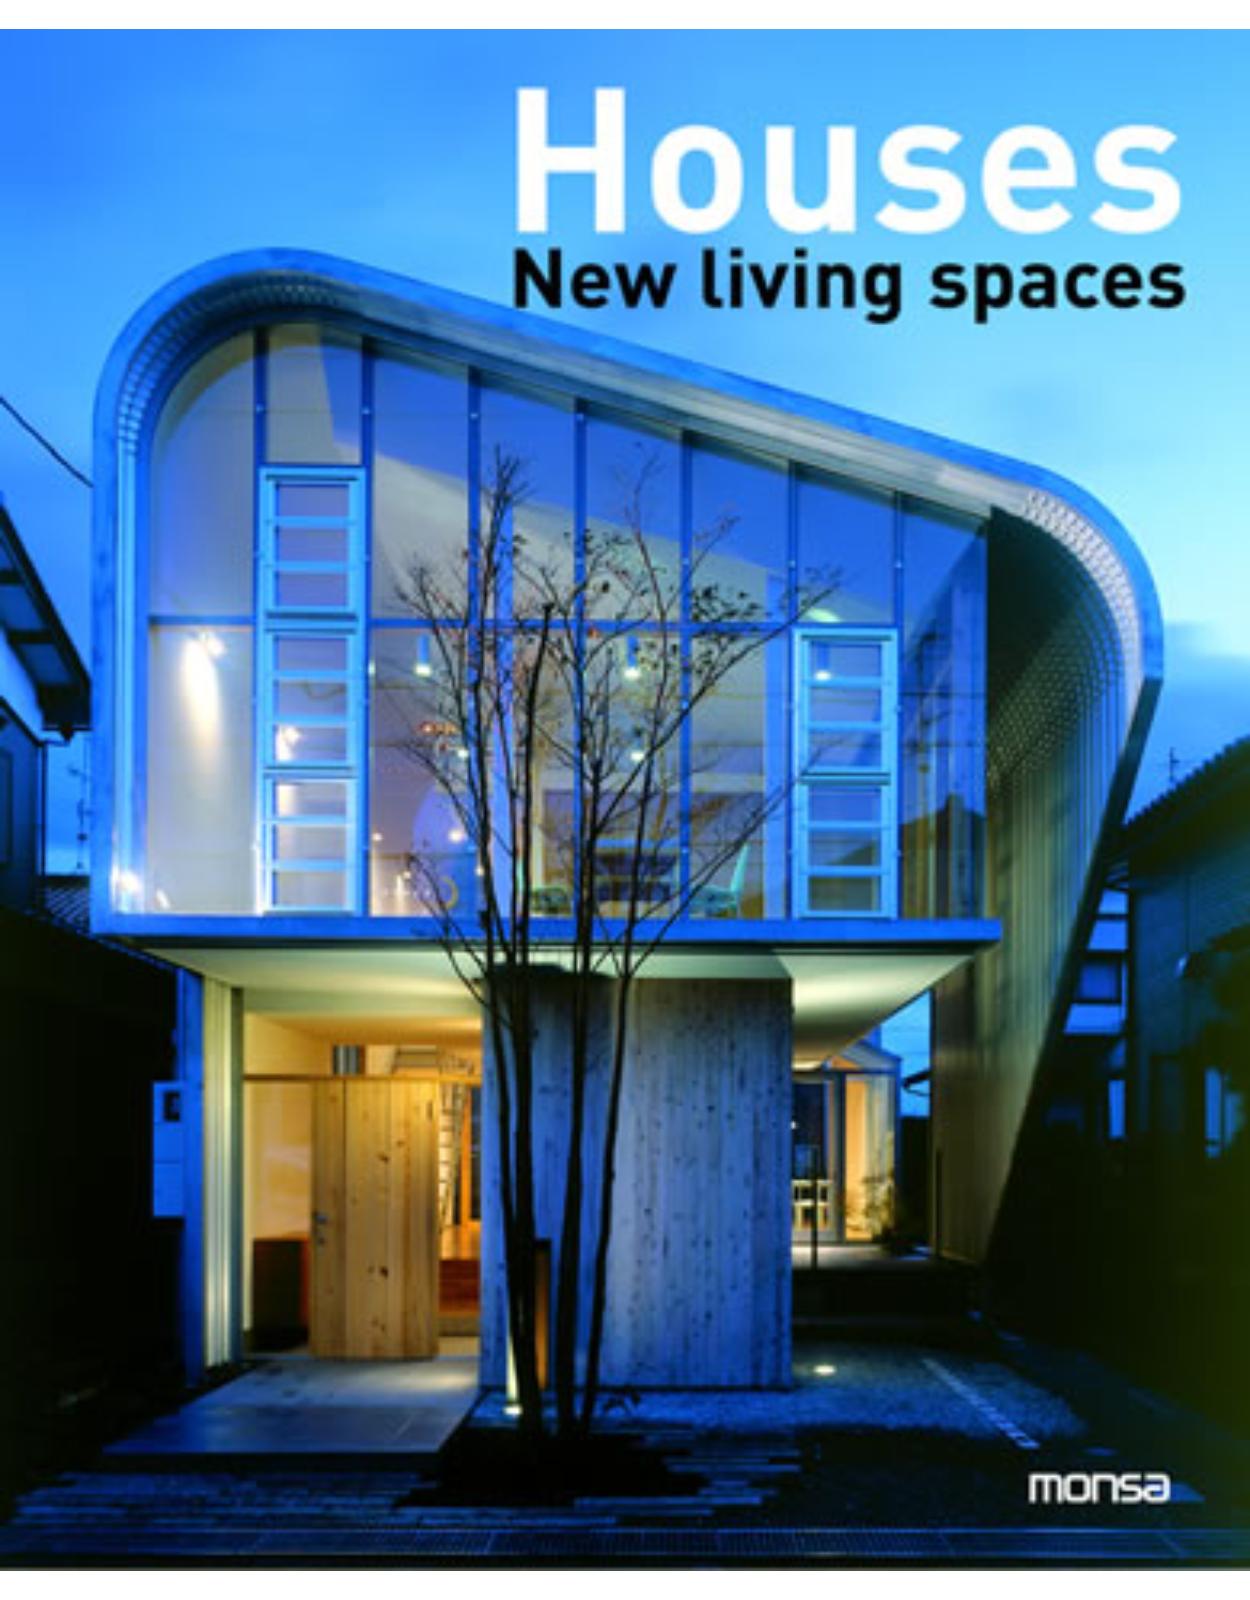 Houses: New Living Spaces